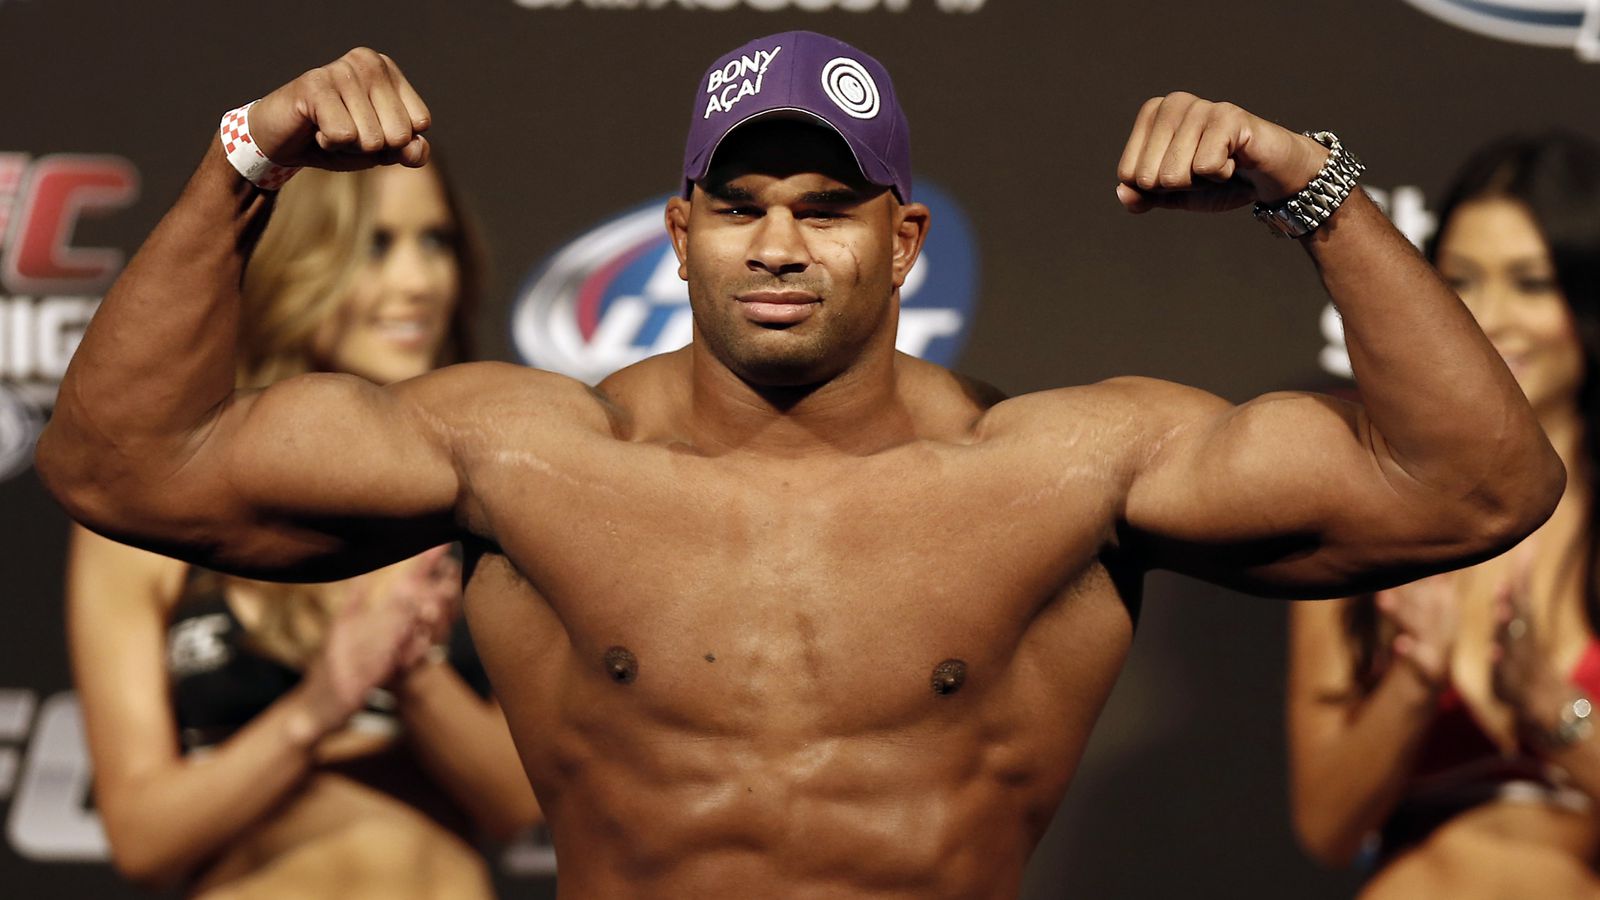 Video: UFC heavyweight Alistair Overeem gains 37 pounds in seven days